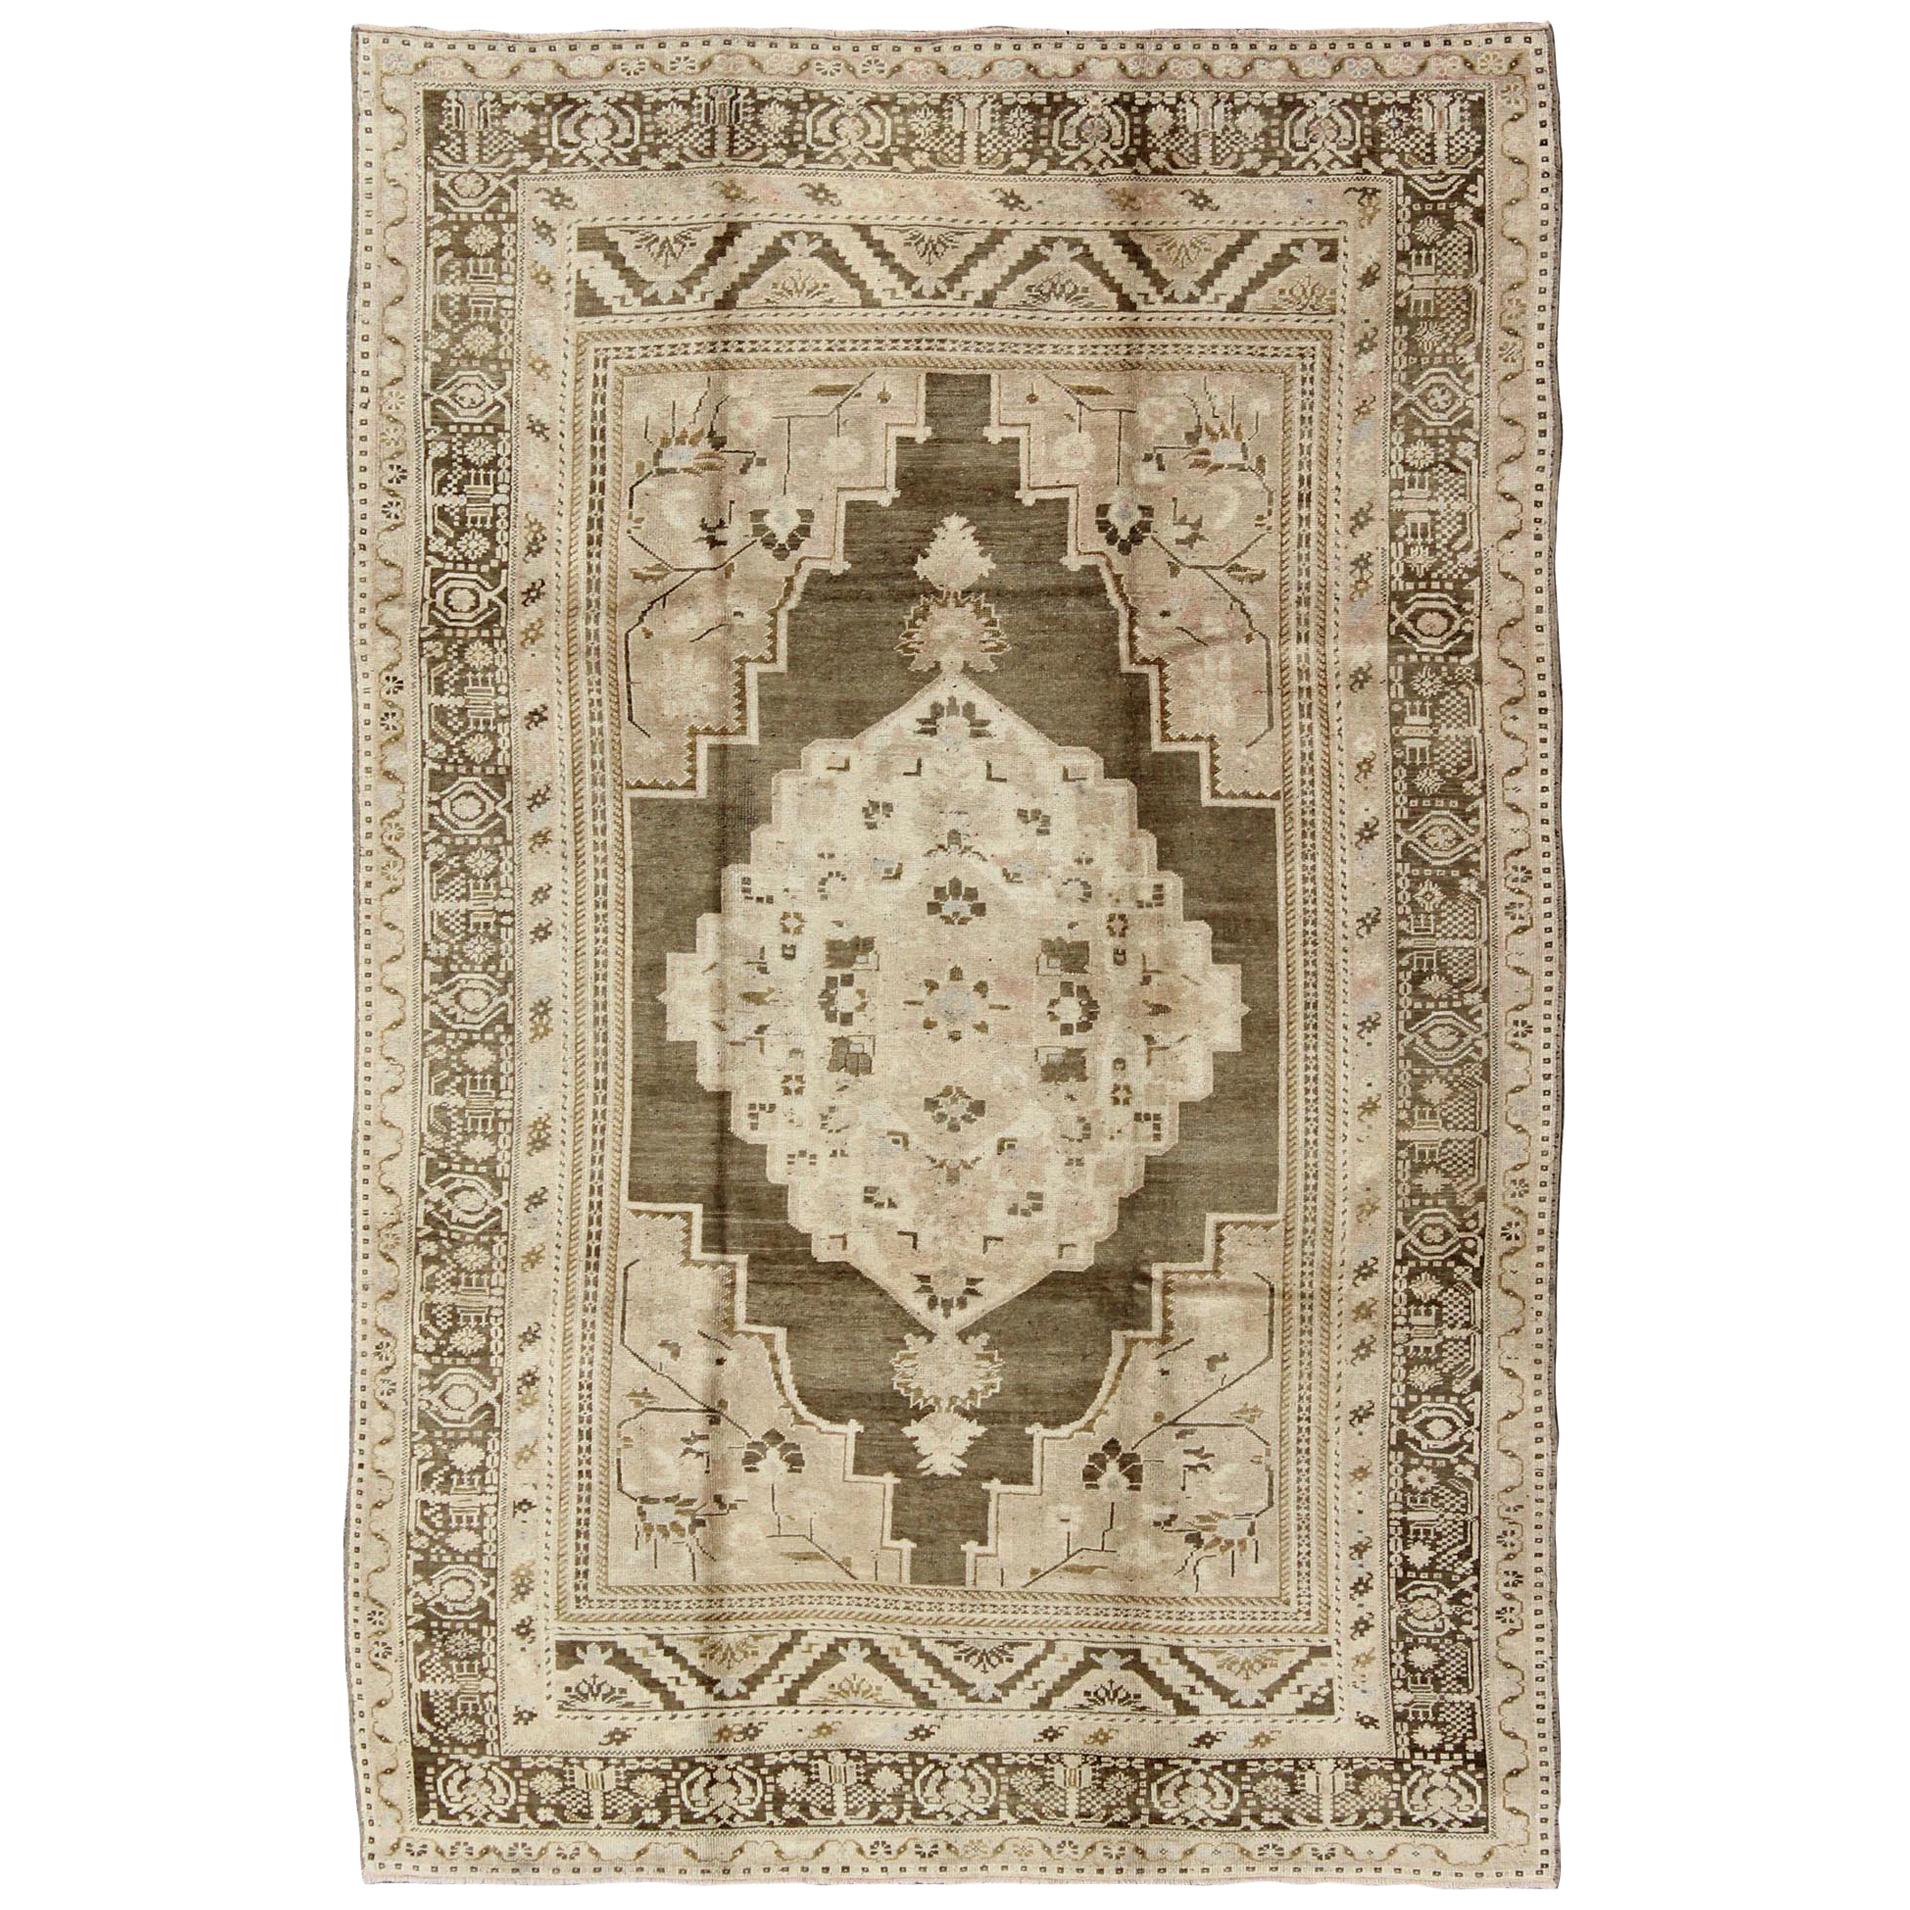 Earth Tone Vintage Turkish Oushak Rug with Tribal Geometric Designs For Sale